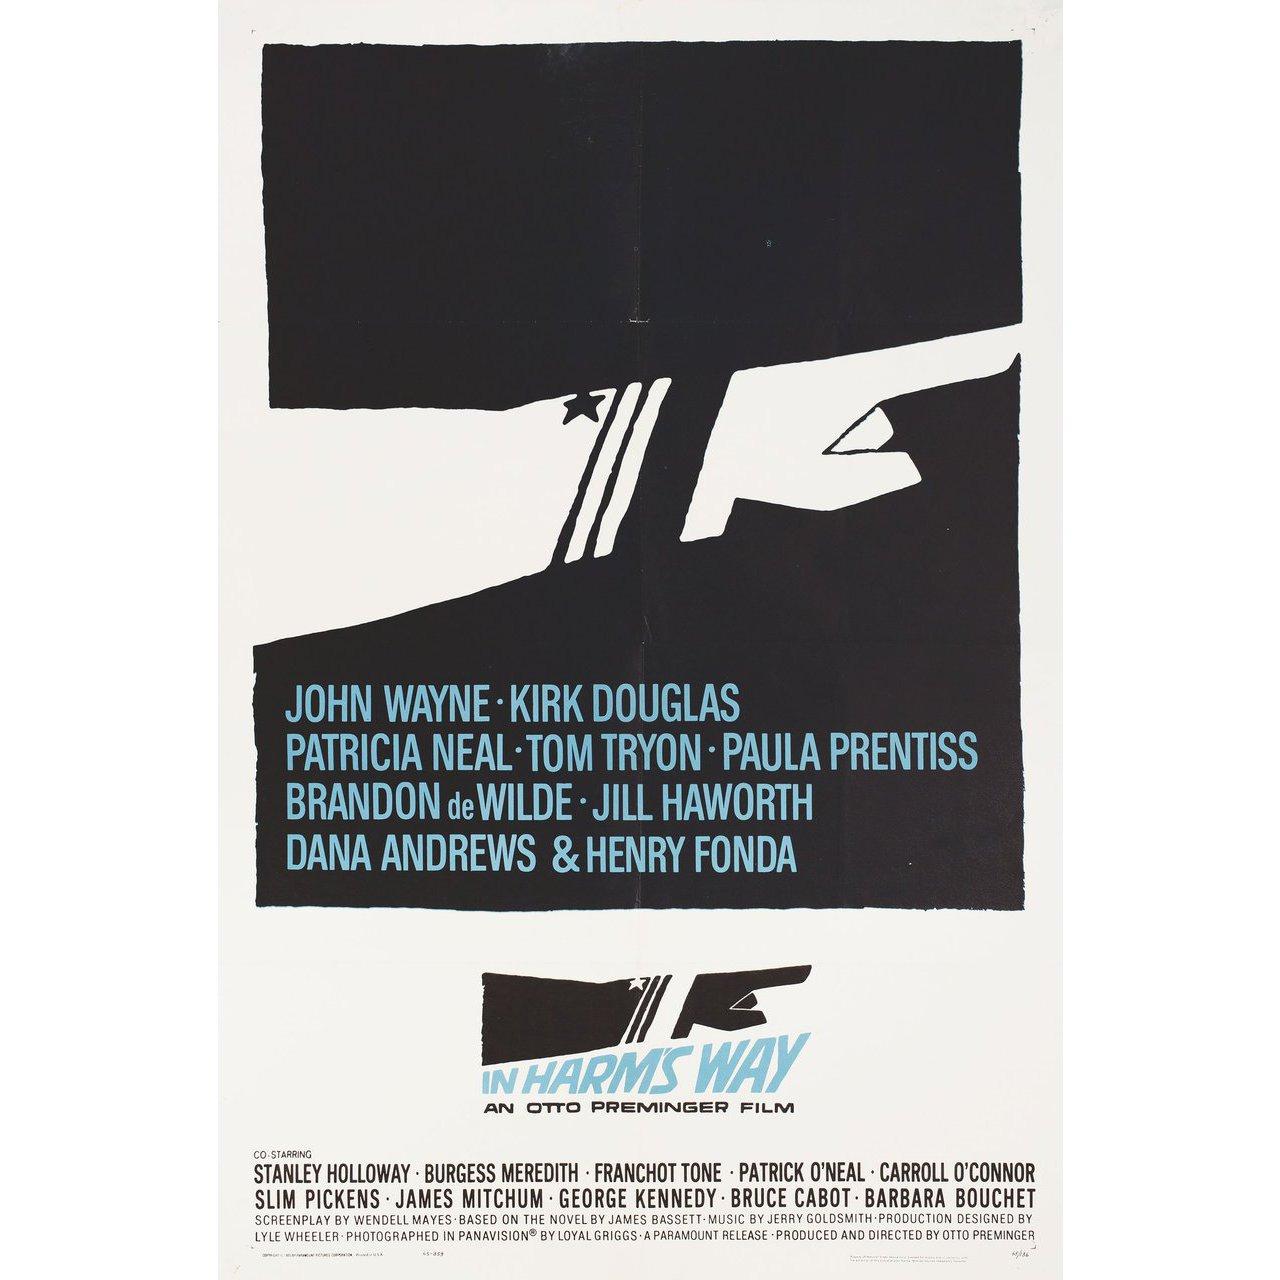 Original 1965 U.S. one sheet poster by Saul Bass for the film In Harm's Way directed by Otto Preminger with John Wayne / Kirk Douglas / Patricia Neal / Tom Tryon. Very Good condition, folded with pinholes & tape in the corners. Many original posters